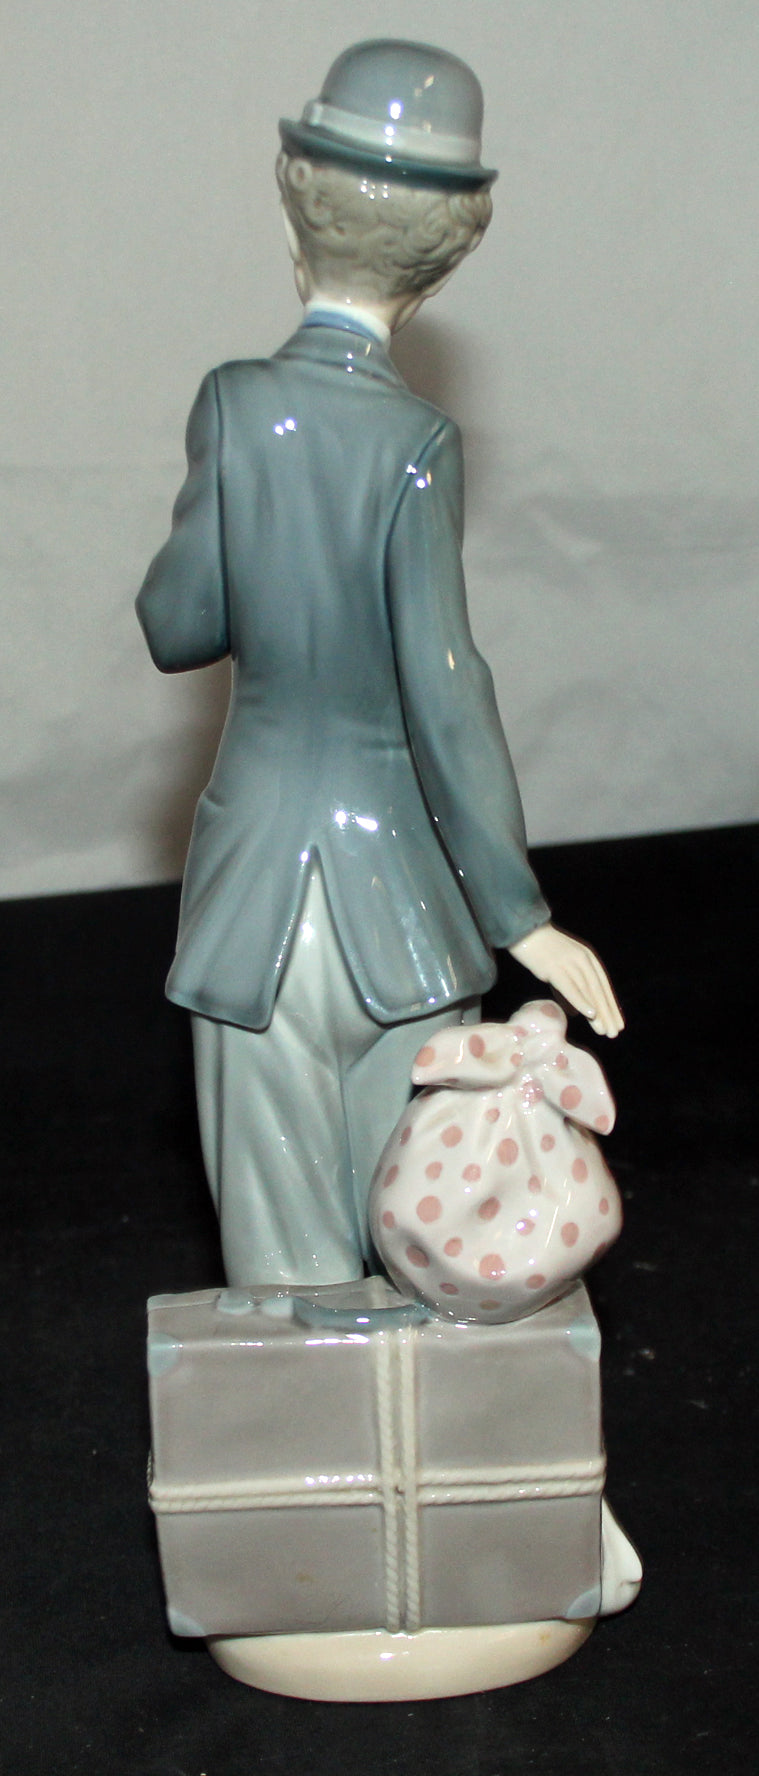 Lladro Figurine: 5233 Charlie The Tramp - As Is